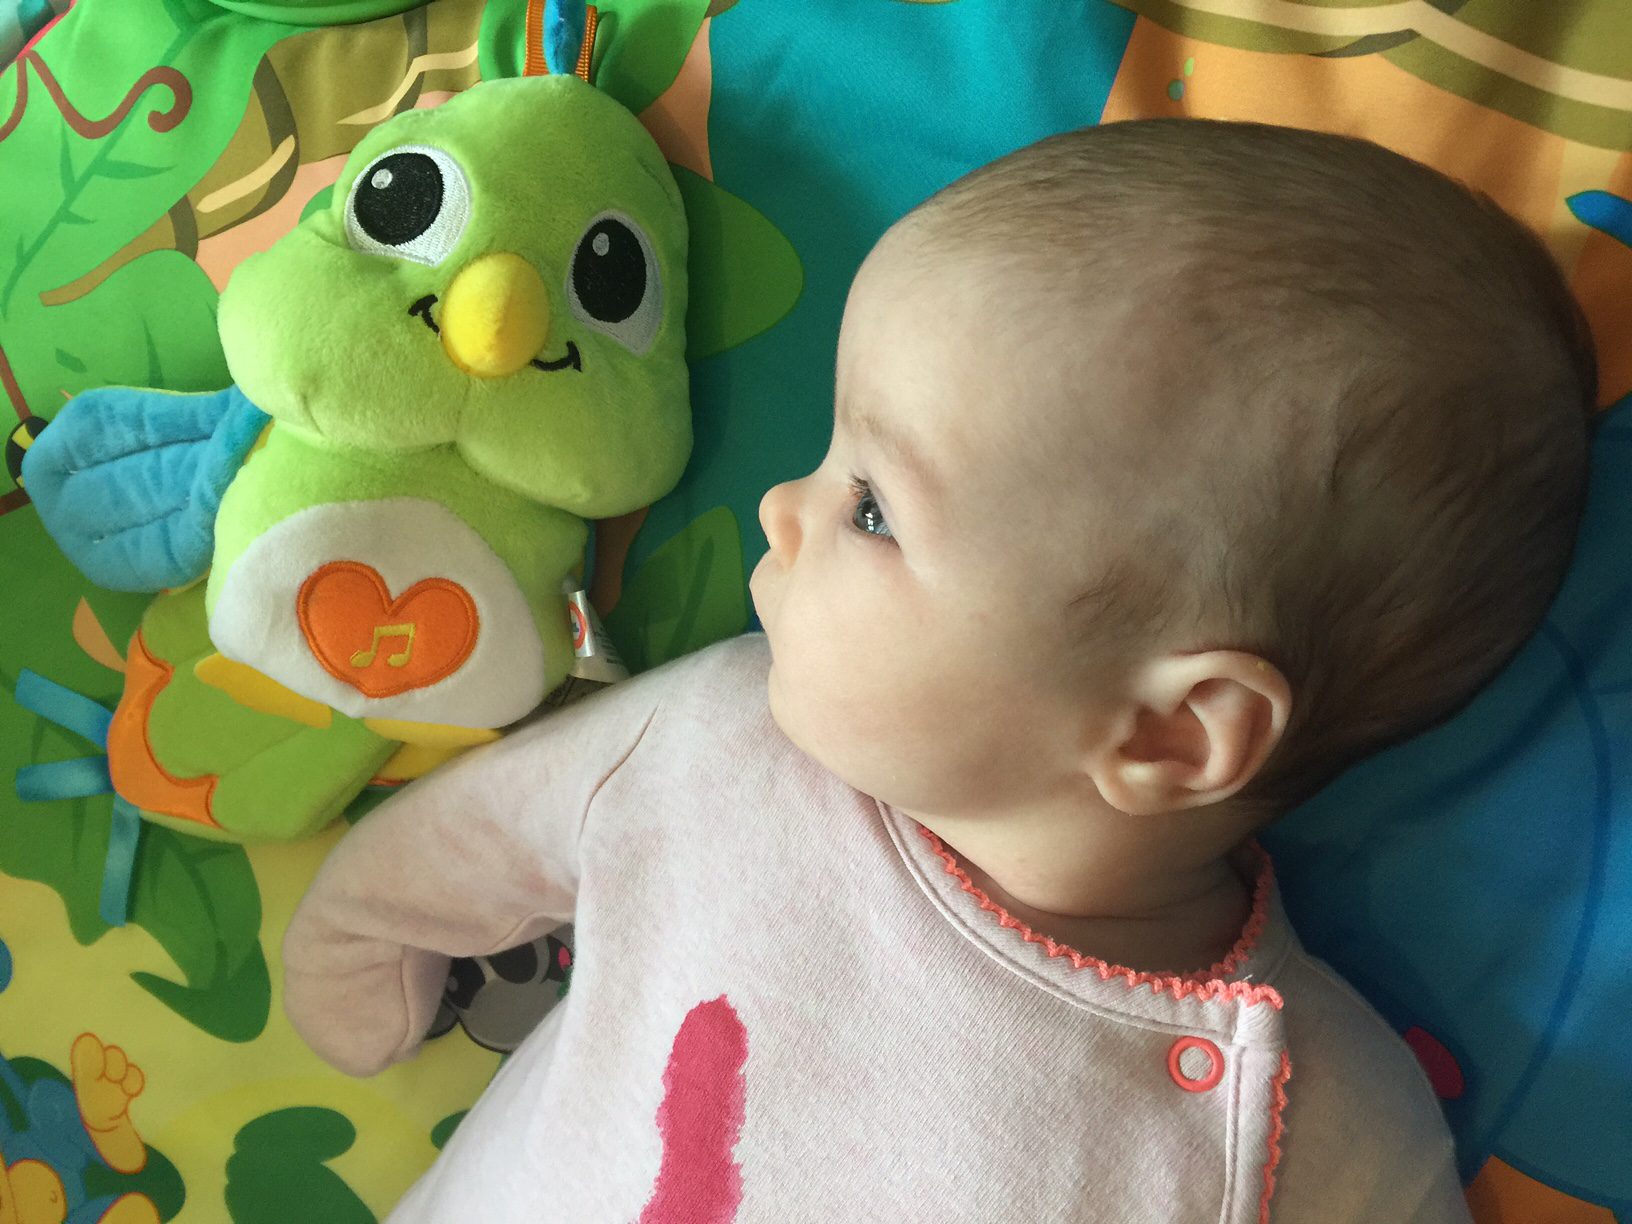 REVIEW – Little Tikes Lullaby Lovebird